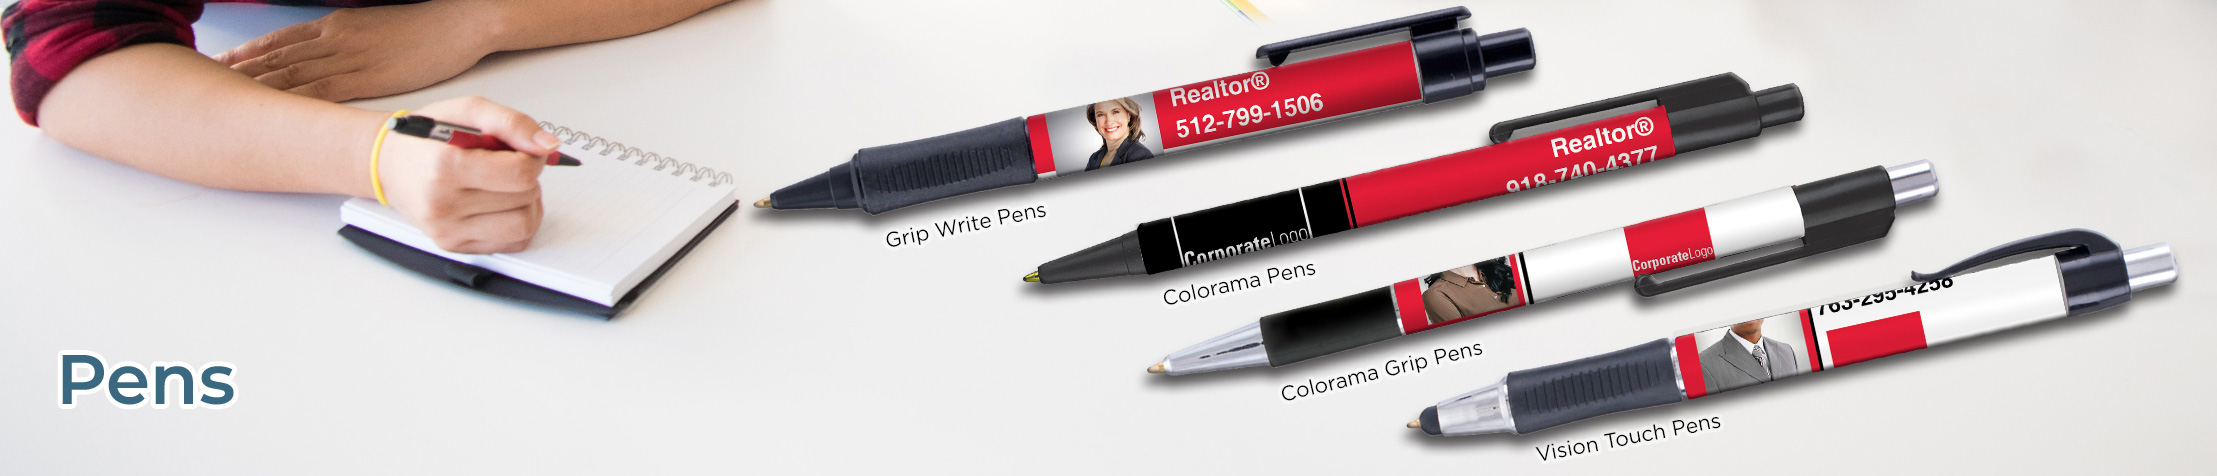 Real Living Real Estate Personalized Pens - promotional products: Grip Write Pens, Colorama Pens, Vision Touch Pens, and Colorama Grip Pens | BestPrintBuy.com